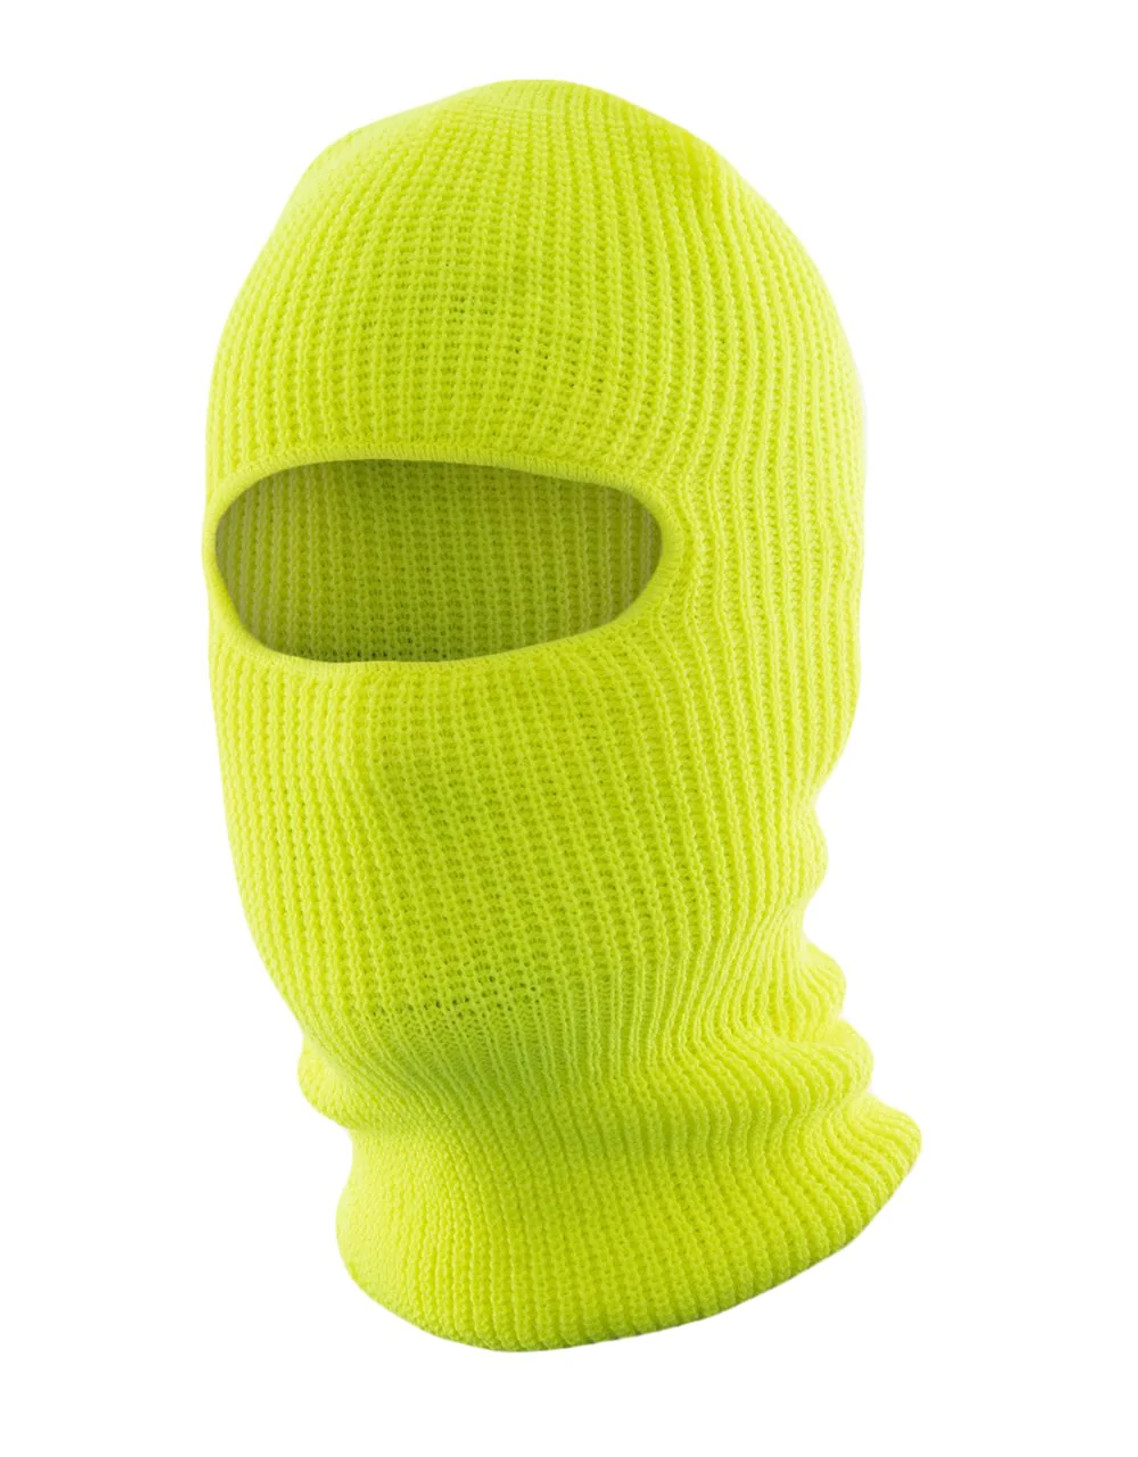 ForceField Hi Vis Knitted Acrylic Balaclava, one opening | SafetyApparel.ca